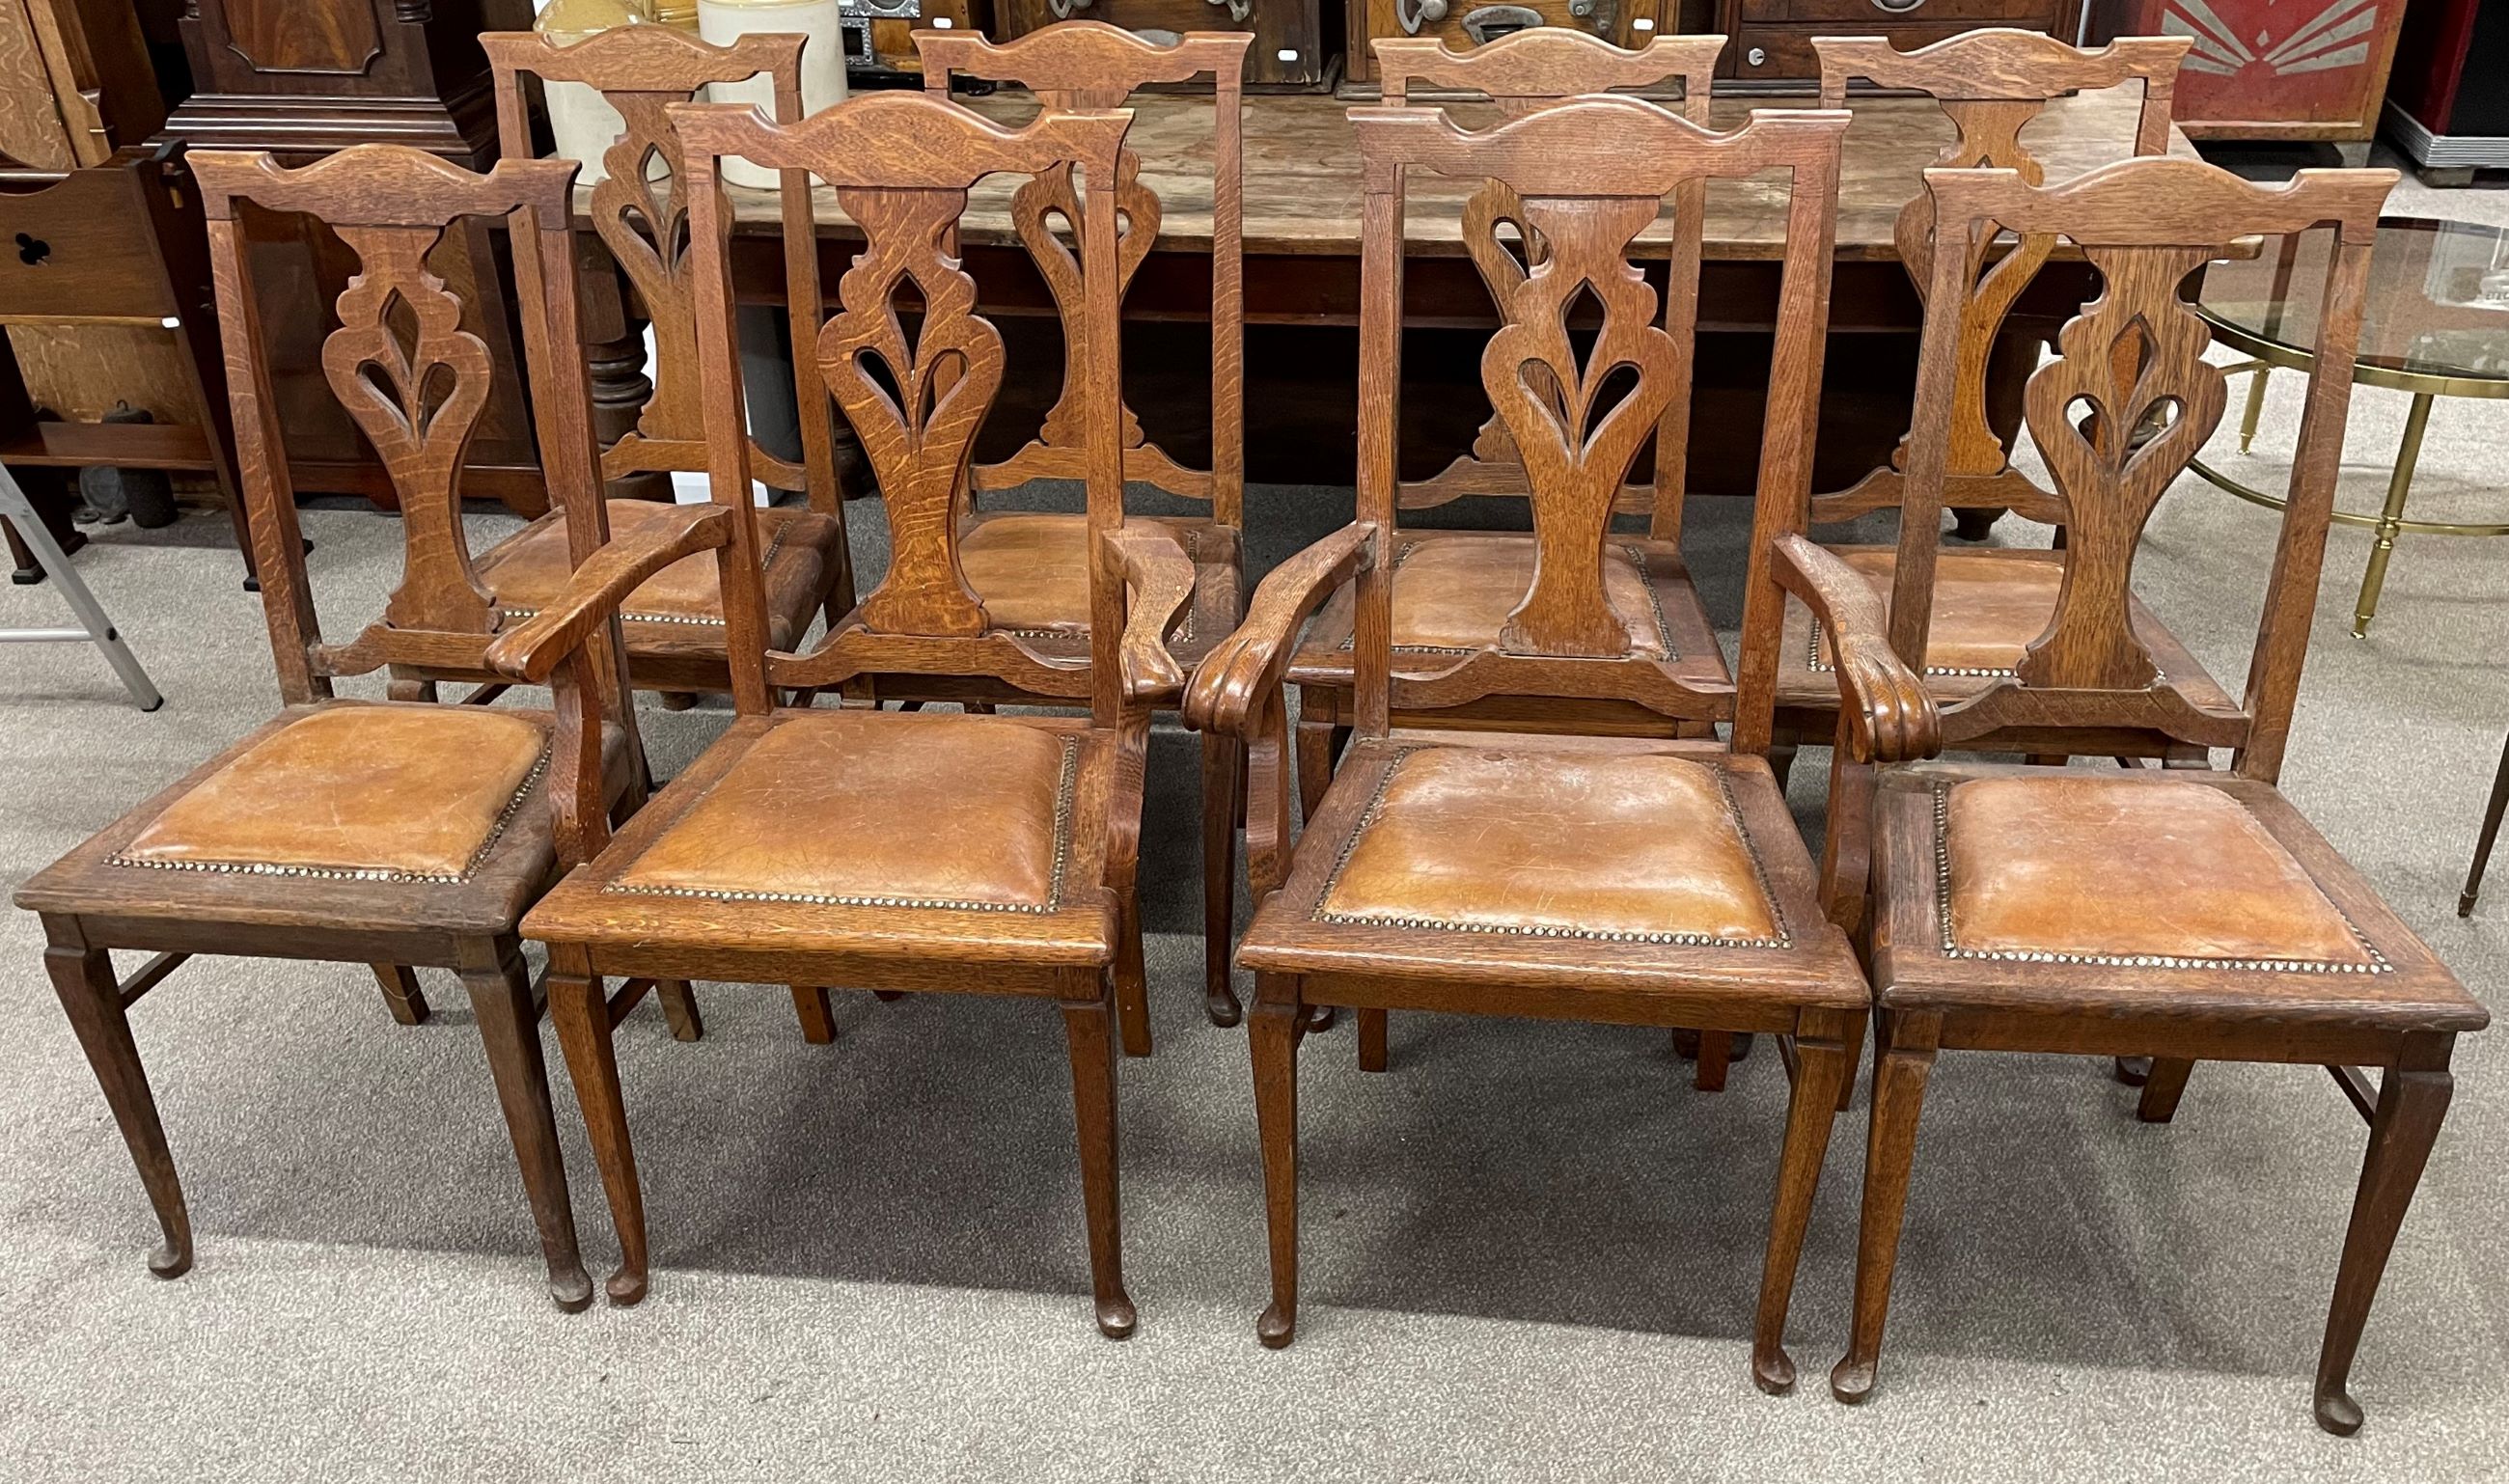 Set of 8 (including 2 carvers) late Victorian dining chairs in oak plus a Chippendale style carver - Image 3 of 3